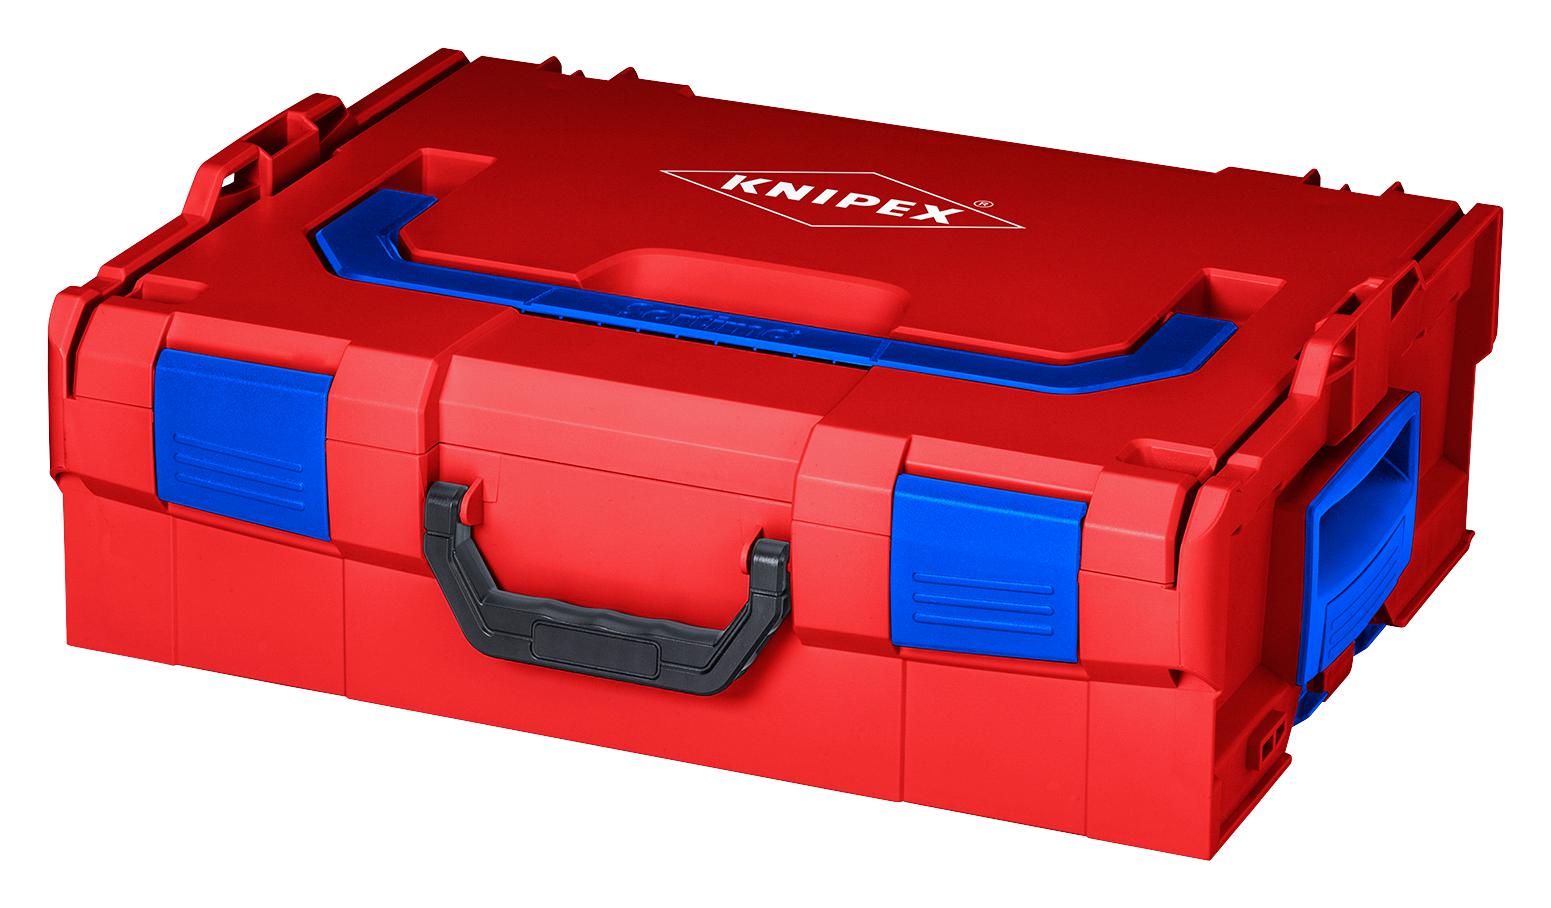 00 21 19 LB LE TOOL CASE, ABS, 357MM X 442MM X 151MM KNIPEX